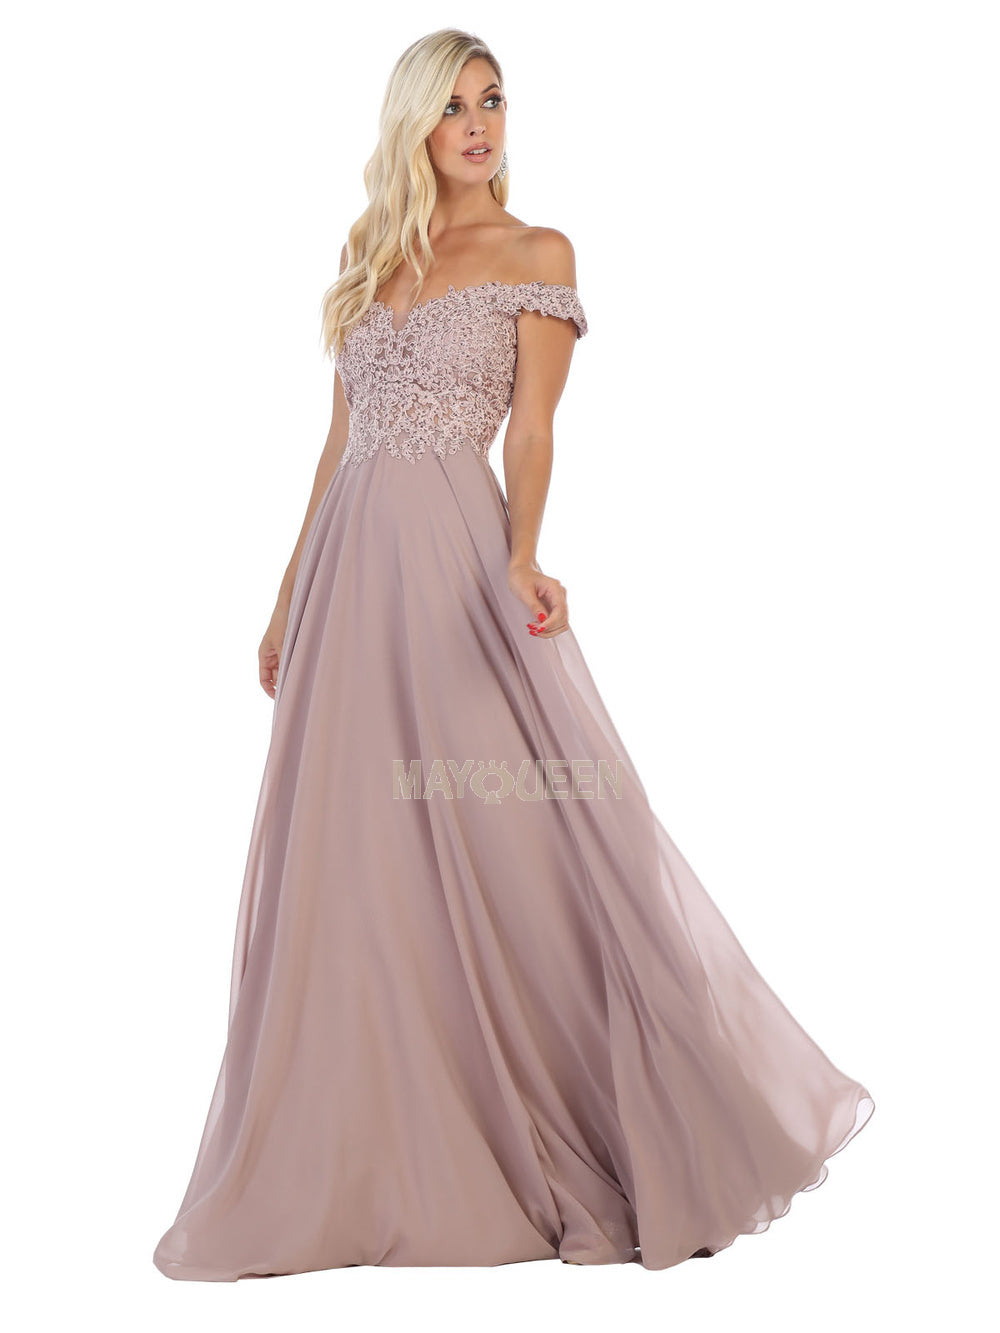 MQ 1602 - Off the Shoulder A-Line Prom Gown with Sheer Lace Embellished Bodice Corset Back & Flowy Chiffon Skirt Prom Dress Mayqueen 2 MAUVE 